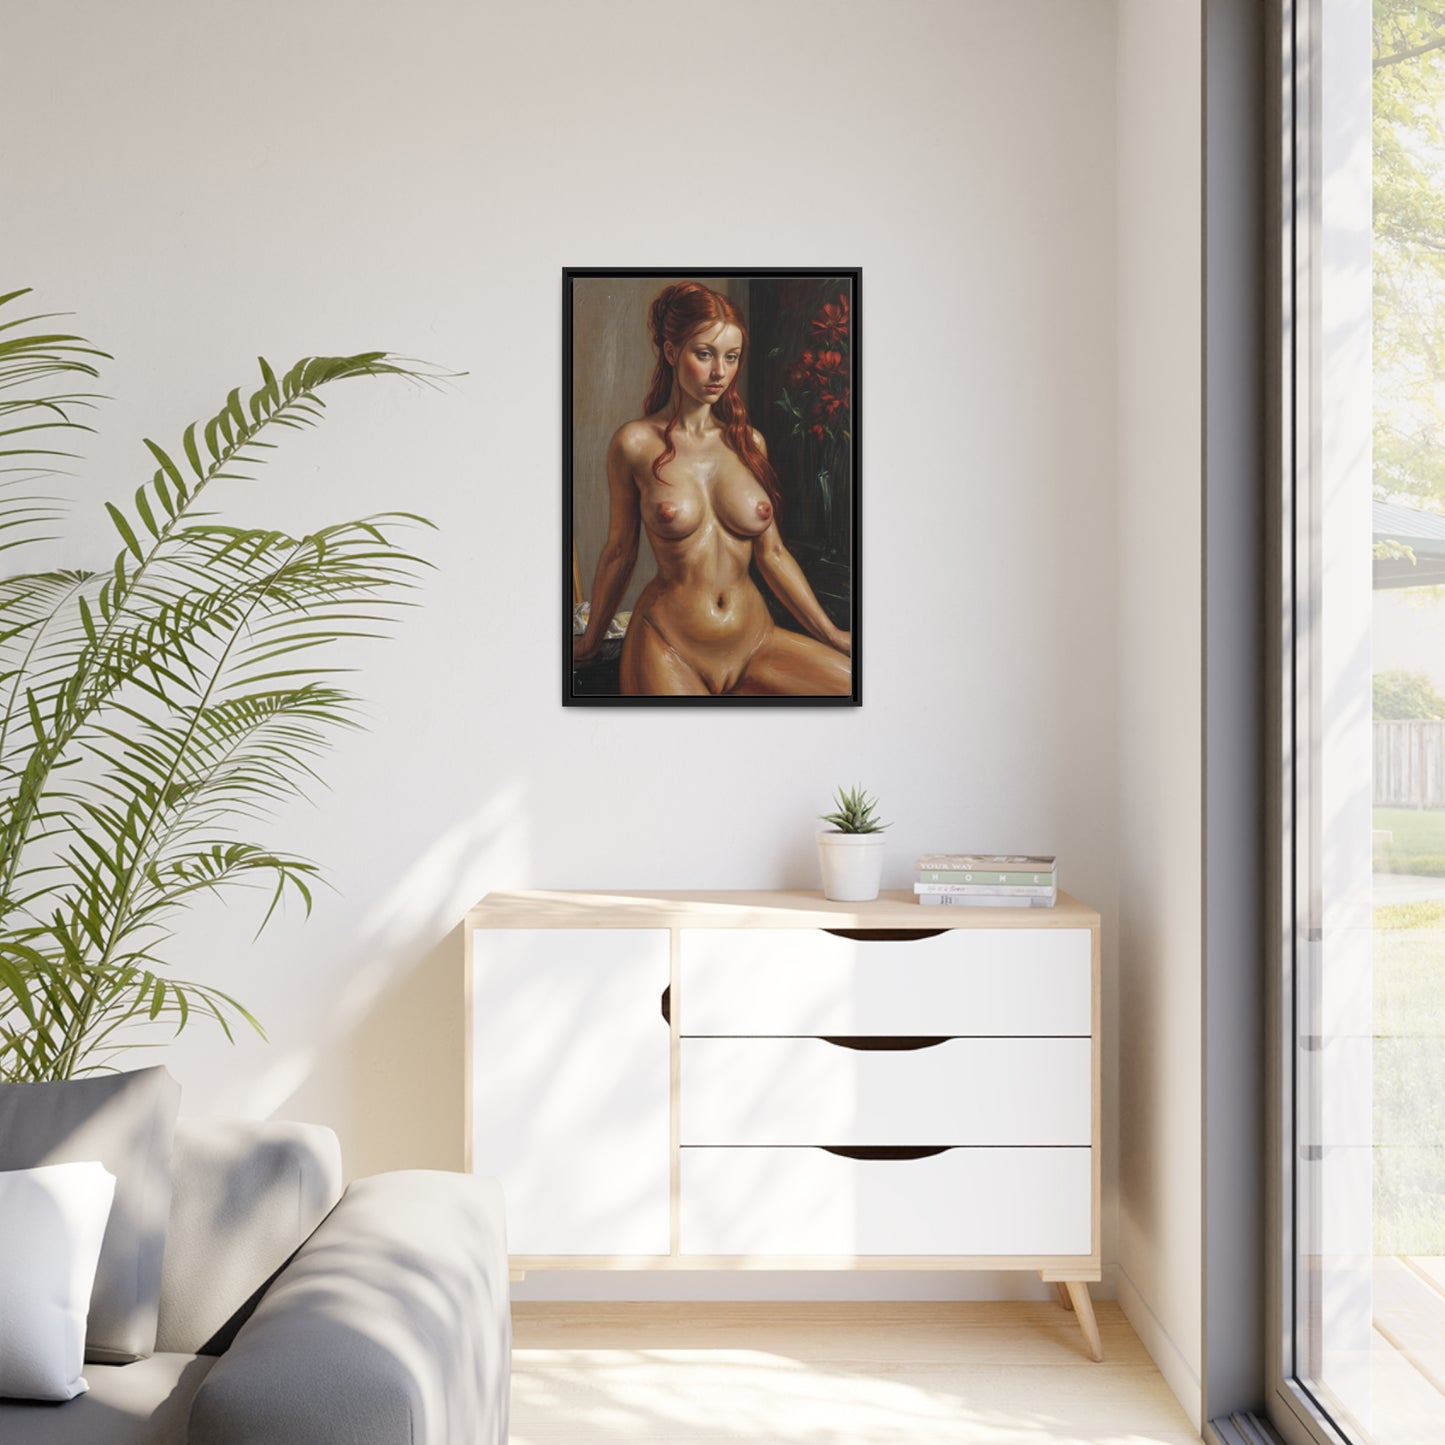 Ethereal Contemplation - nude art canvas art wall